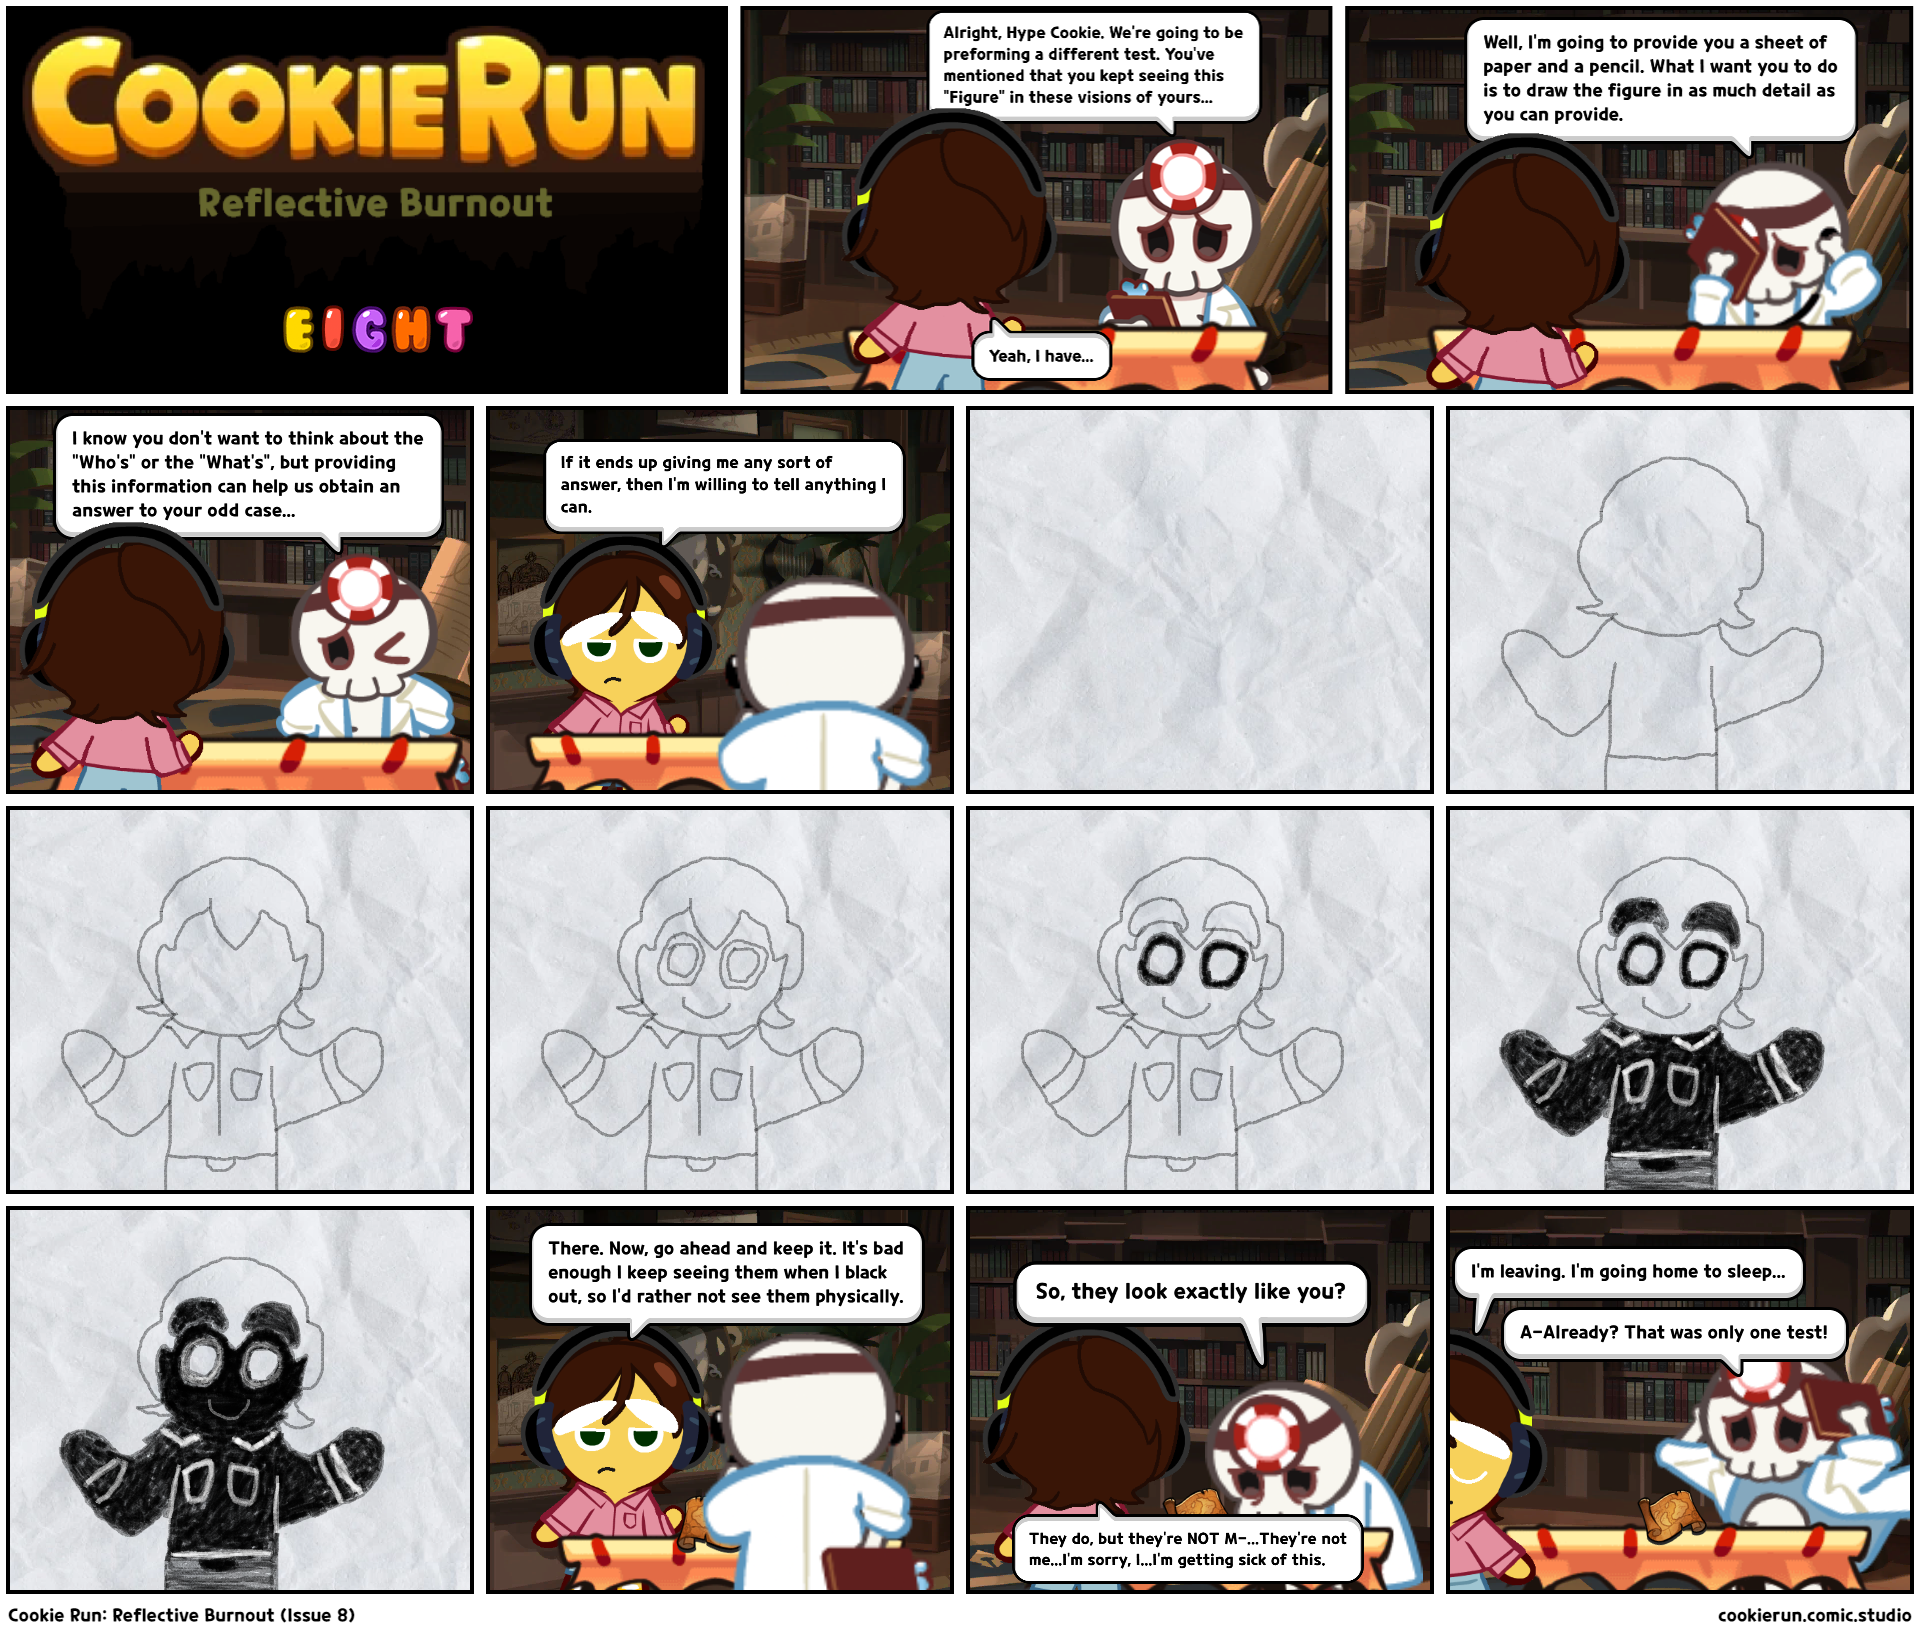 Cookie Run: Reflective Burnout (Issue 8)